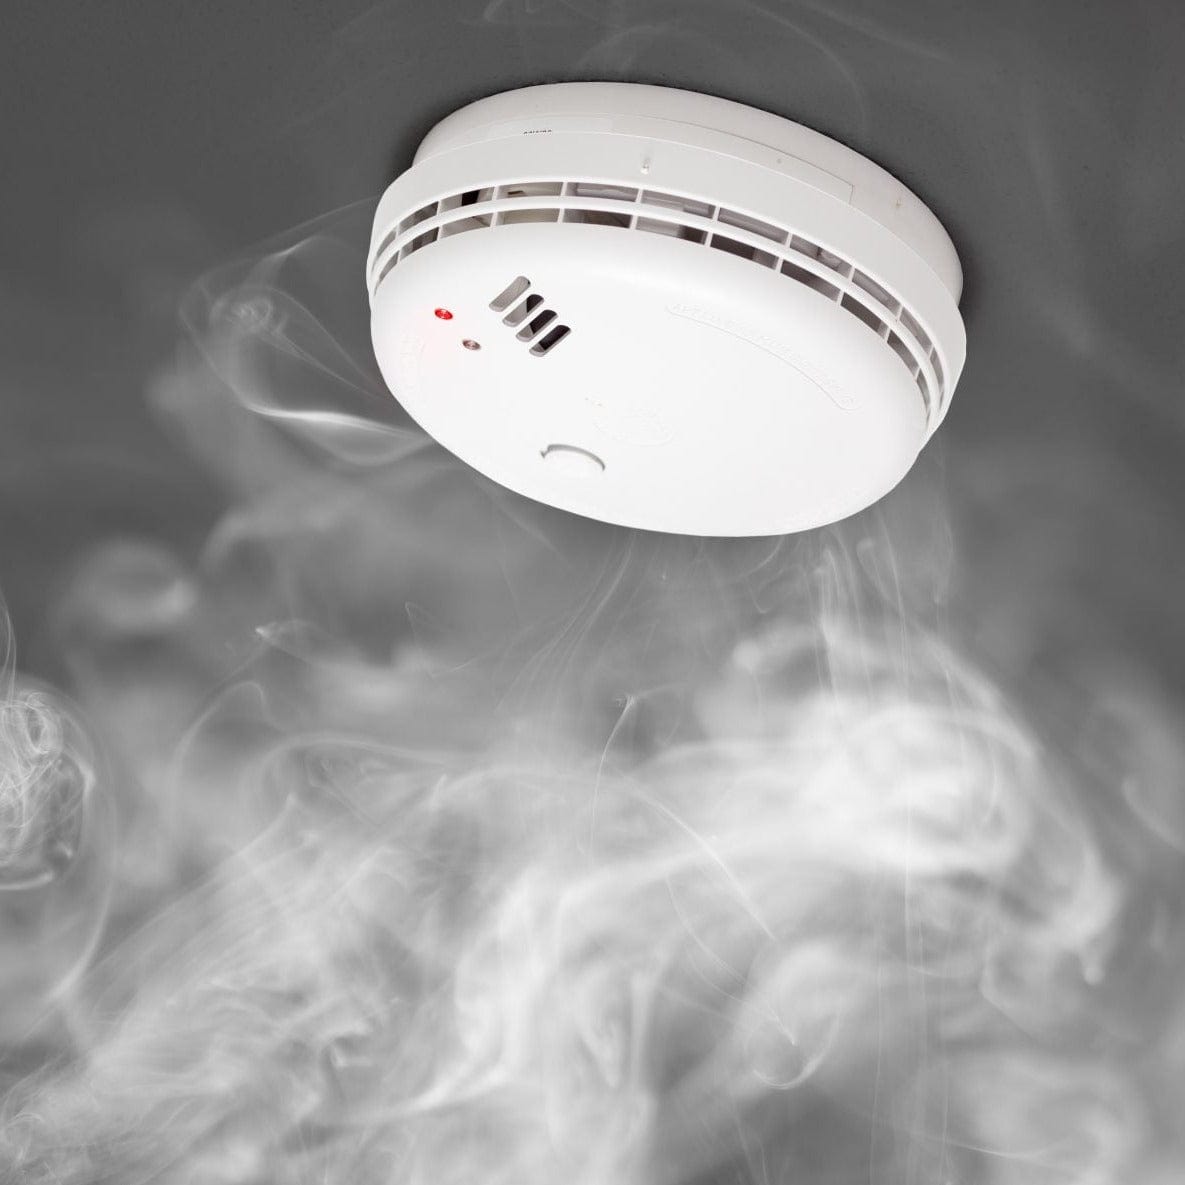 Expert Smoke Detector Installation and Replacement Services | Supply Master Handyman Service Ghana Handyman Service Buy Tools hardware Building materials